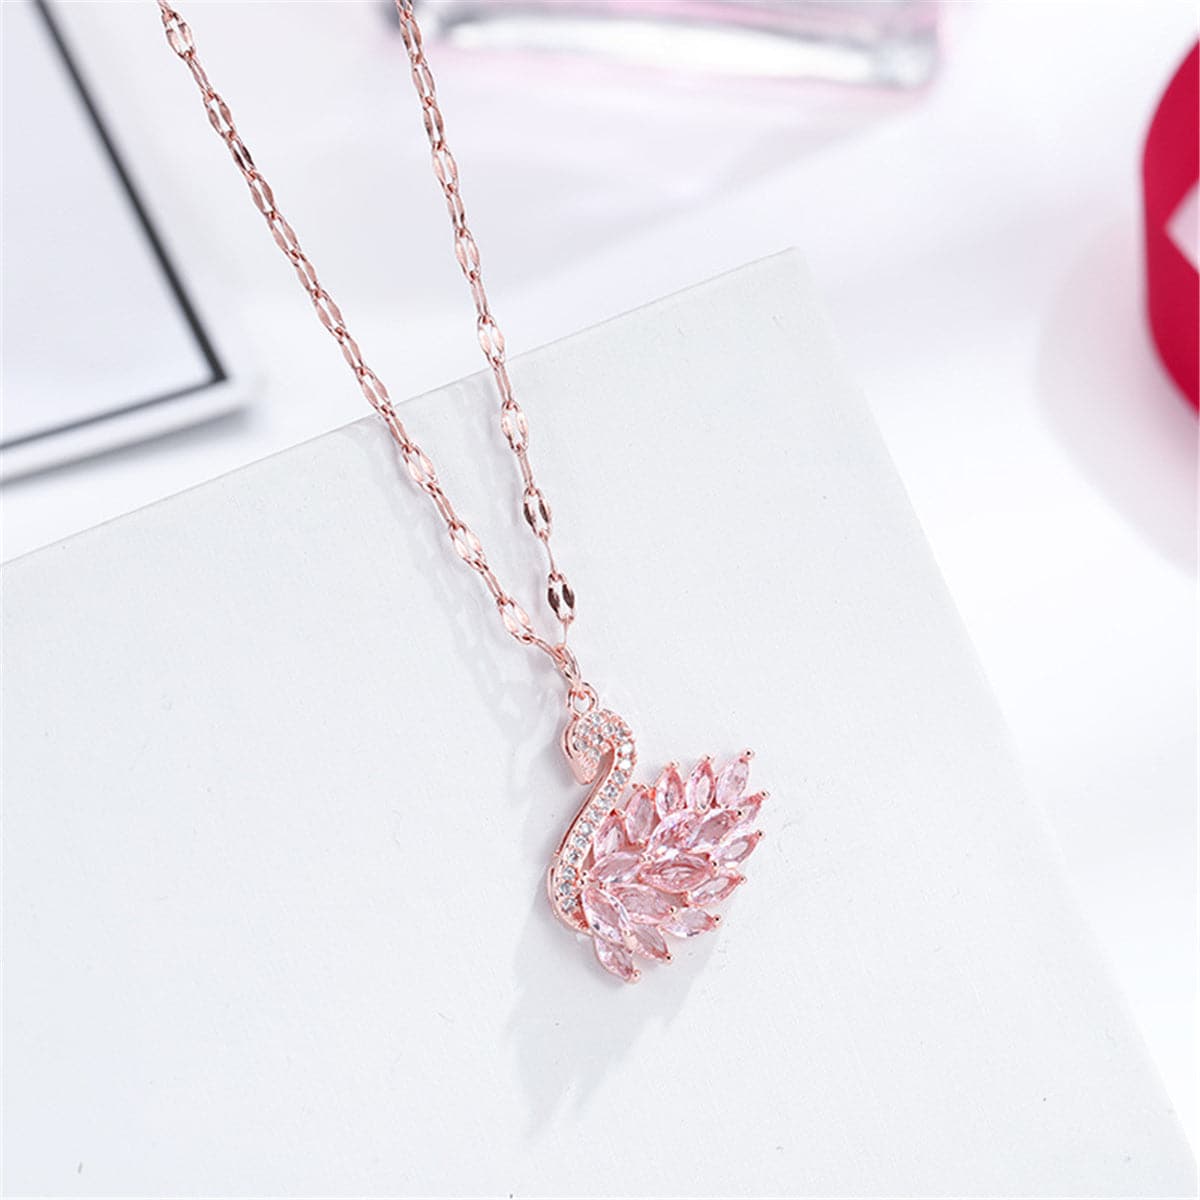 Pink Crystal 18K Rose Gold-Plated Swan Pendant Necklace